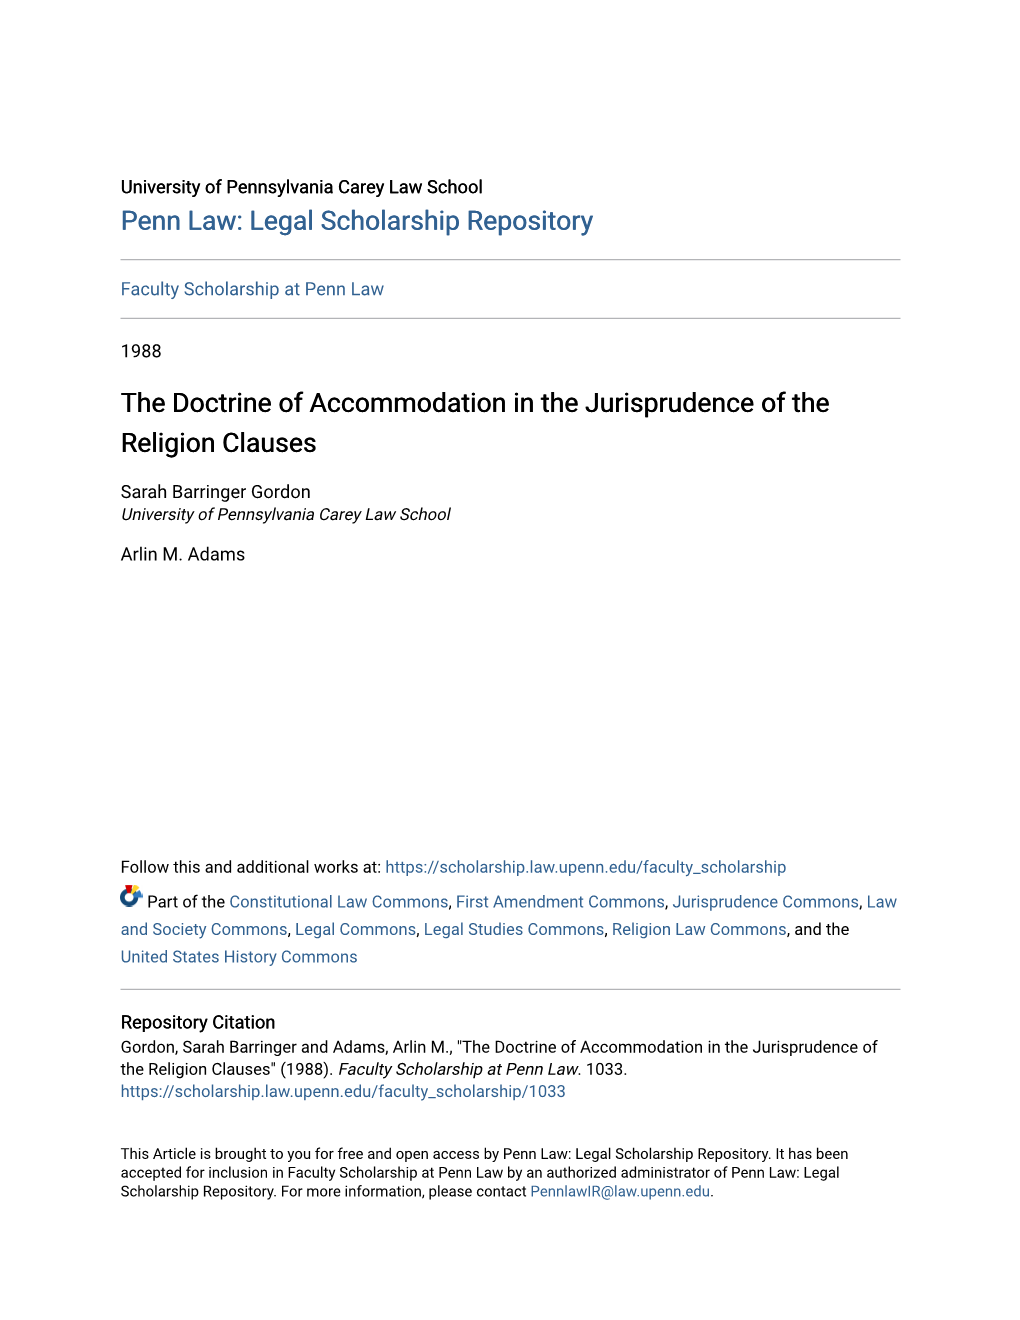 The Doctrine of Accommodation in the Jurisprudence of the Religion Clauses